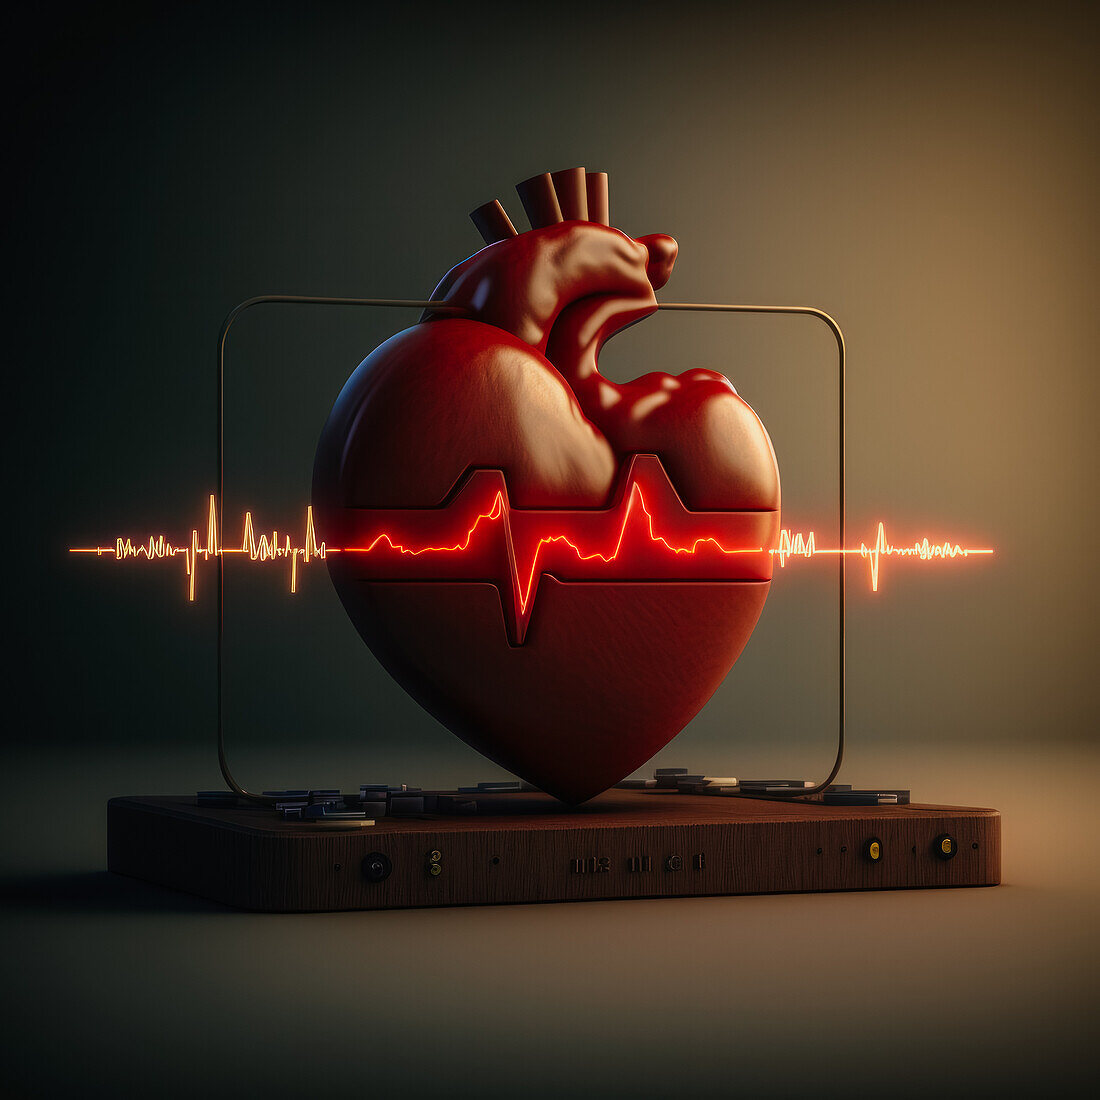 Illuminated cardiogram placed on red decorative heart on wooden board against brown background